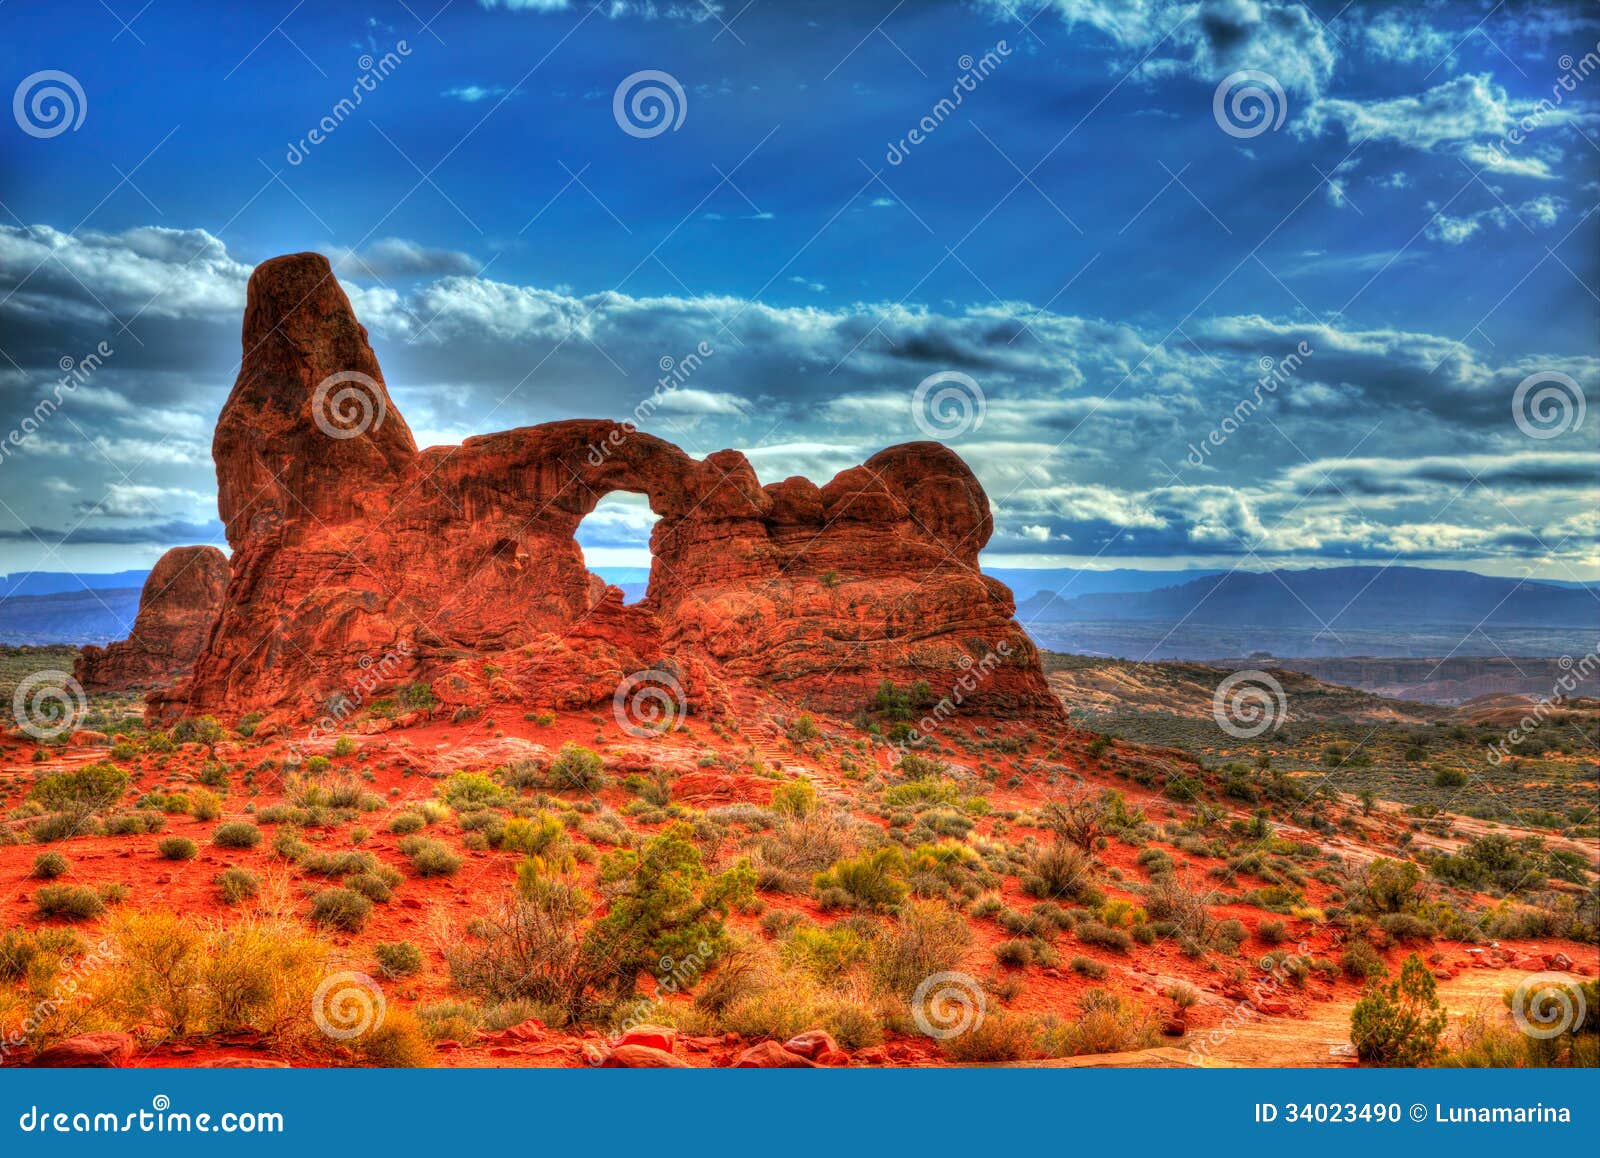 arches national park in moab utah usa